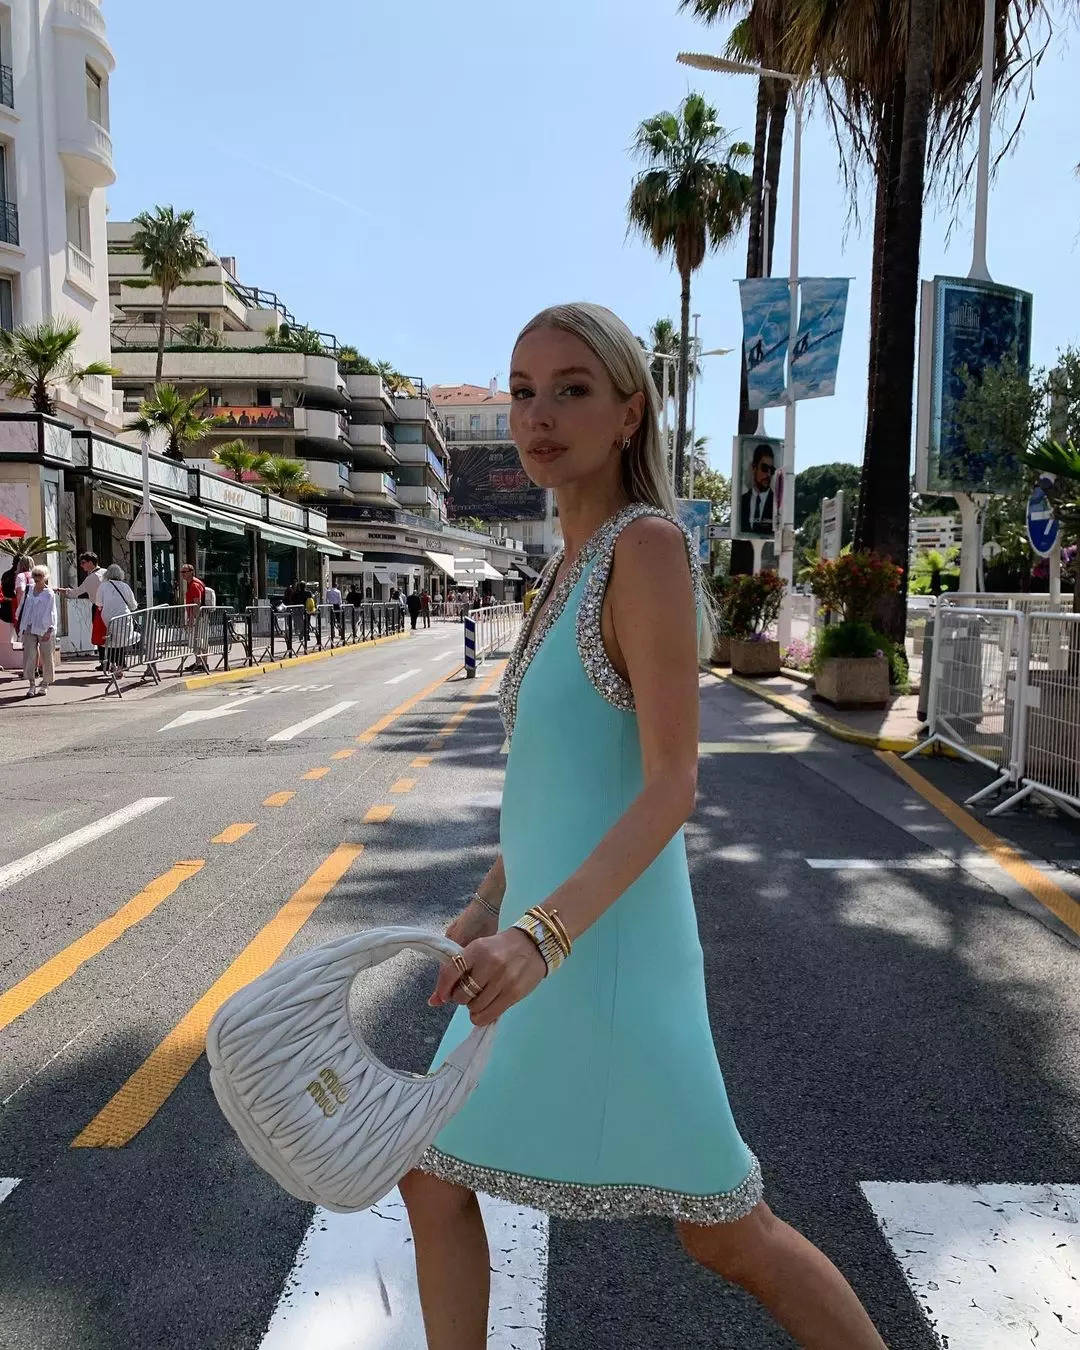 Leonie Hannes at Cannes 2022